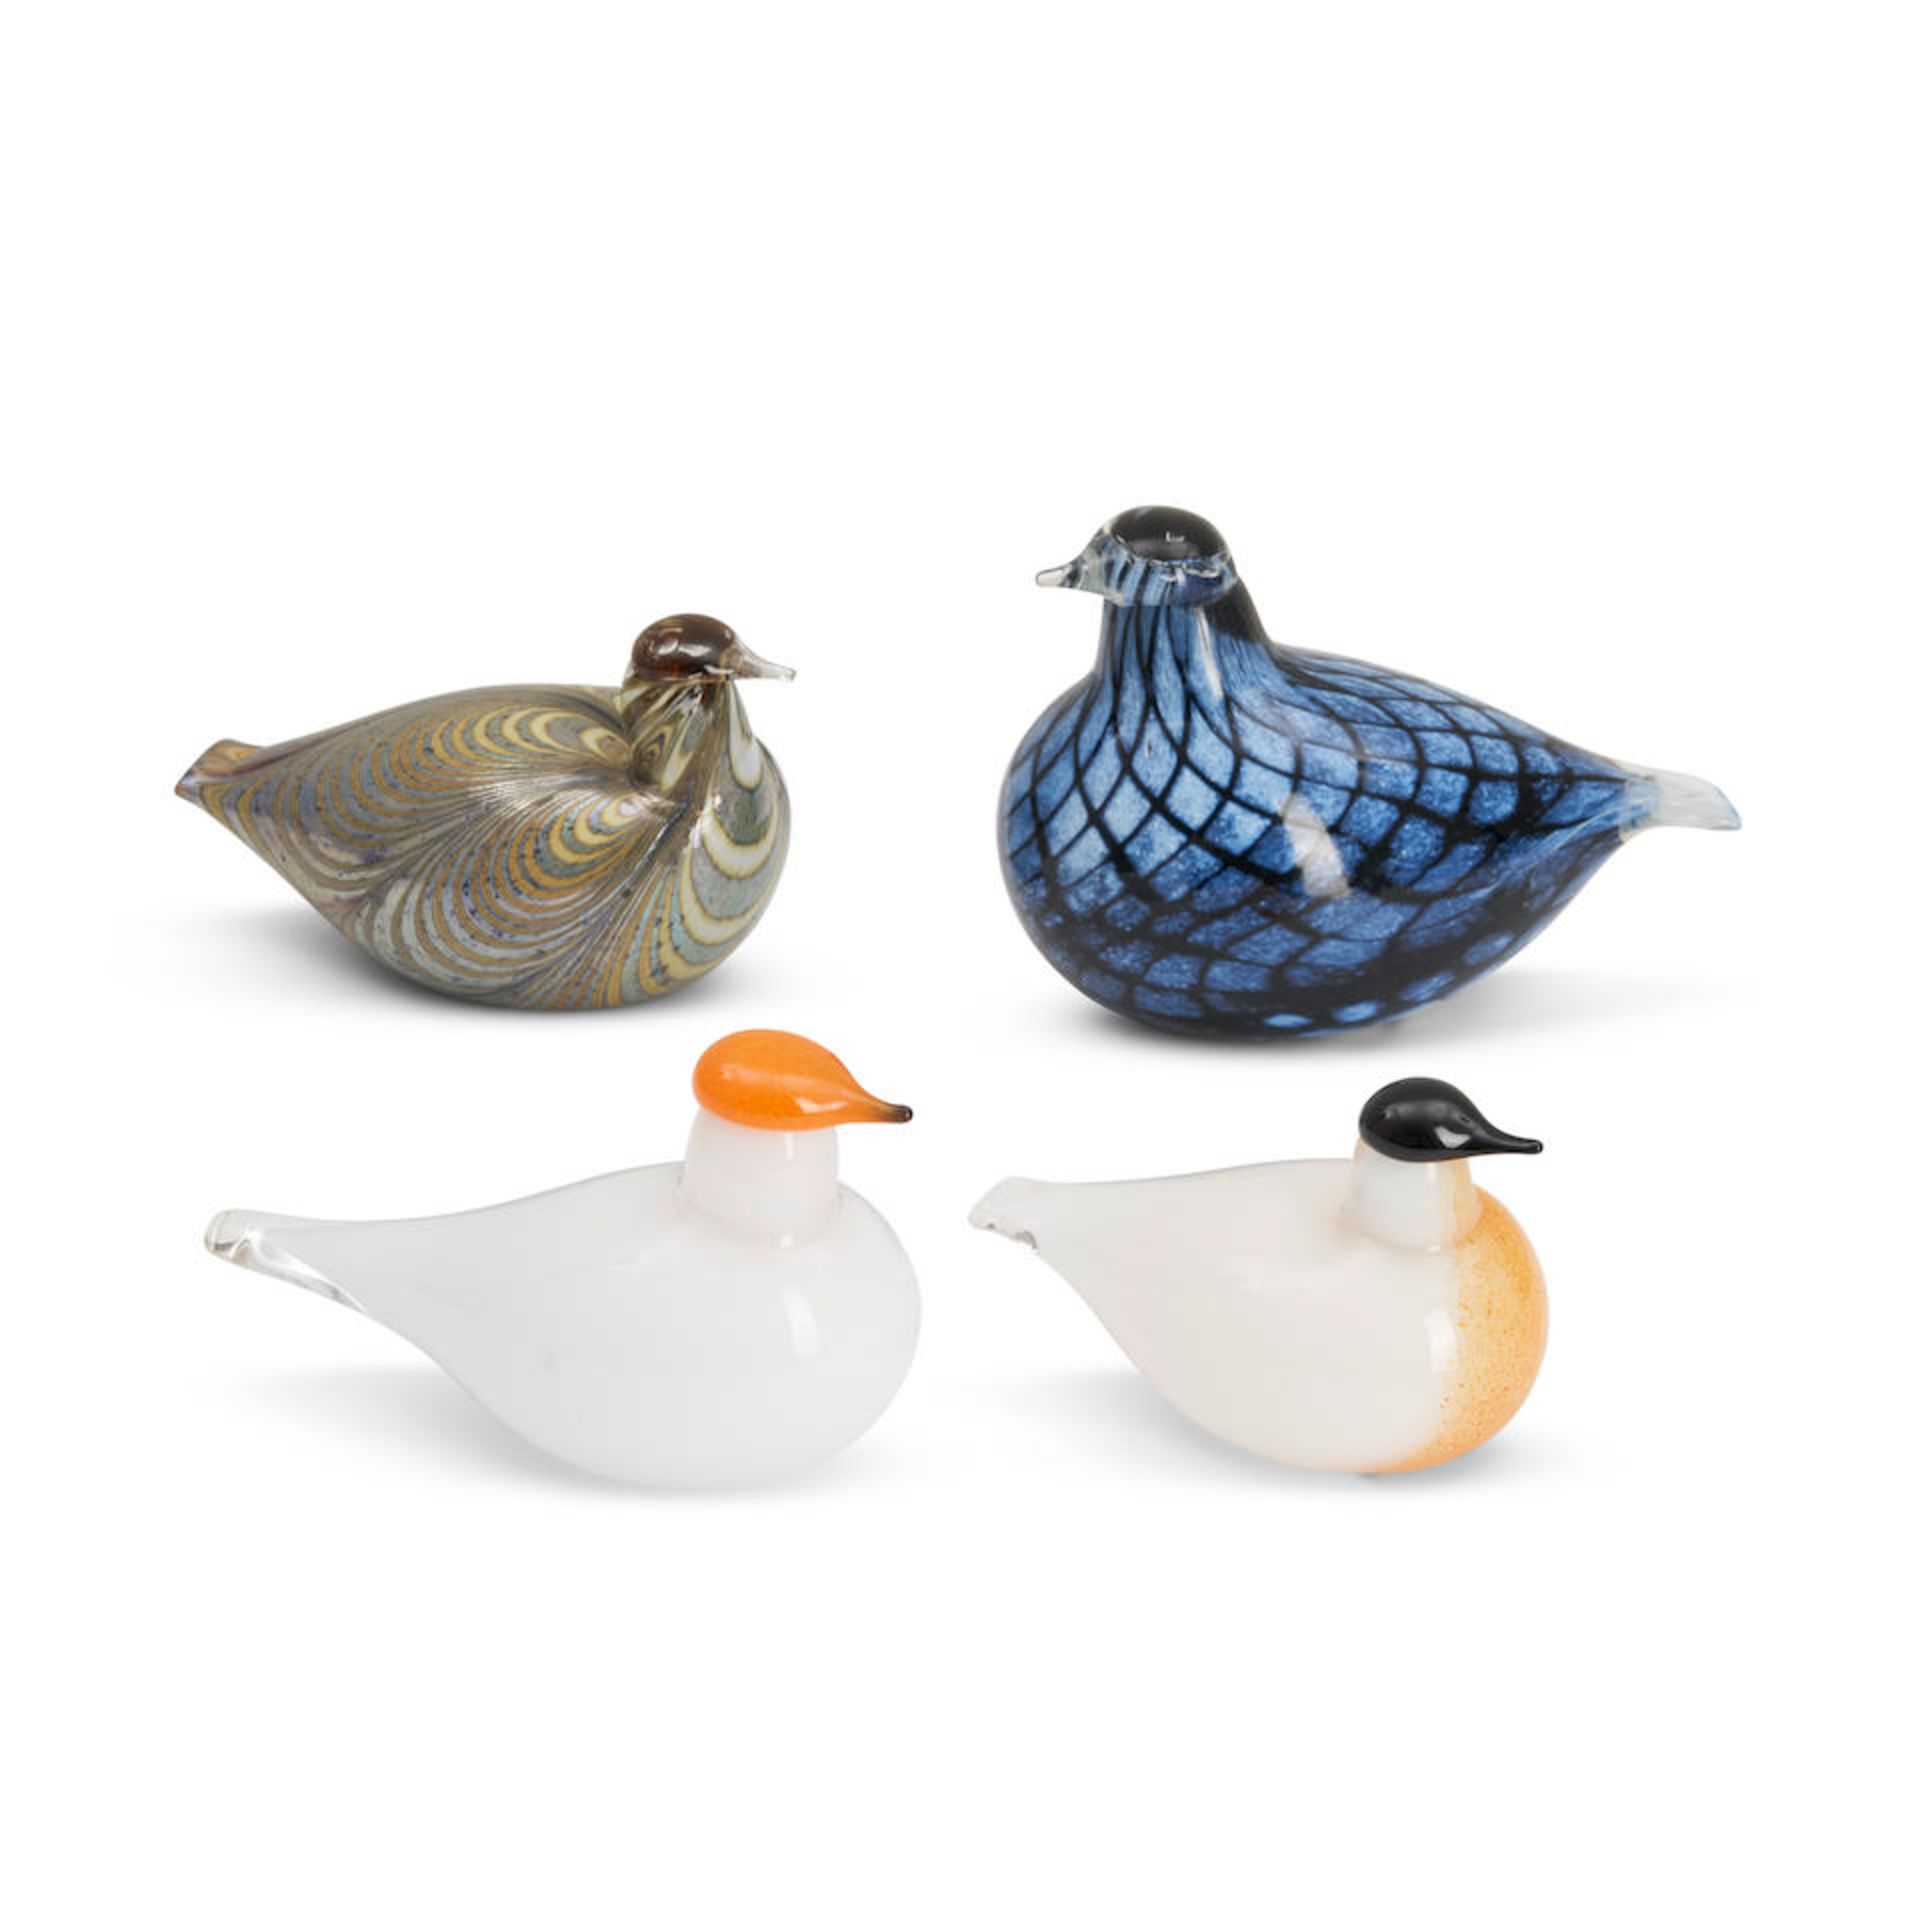 FOUR SPECIAL OCCASION OIVA TOIKKA FOR IITTALA GLASS BIRDS, Finland, c. 1995, bird for the Haemee...